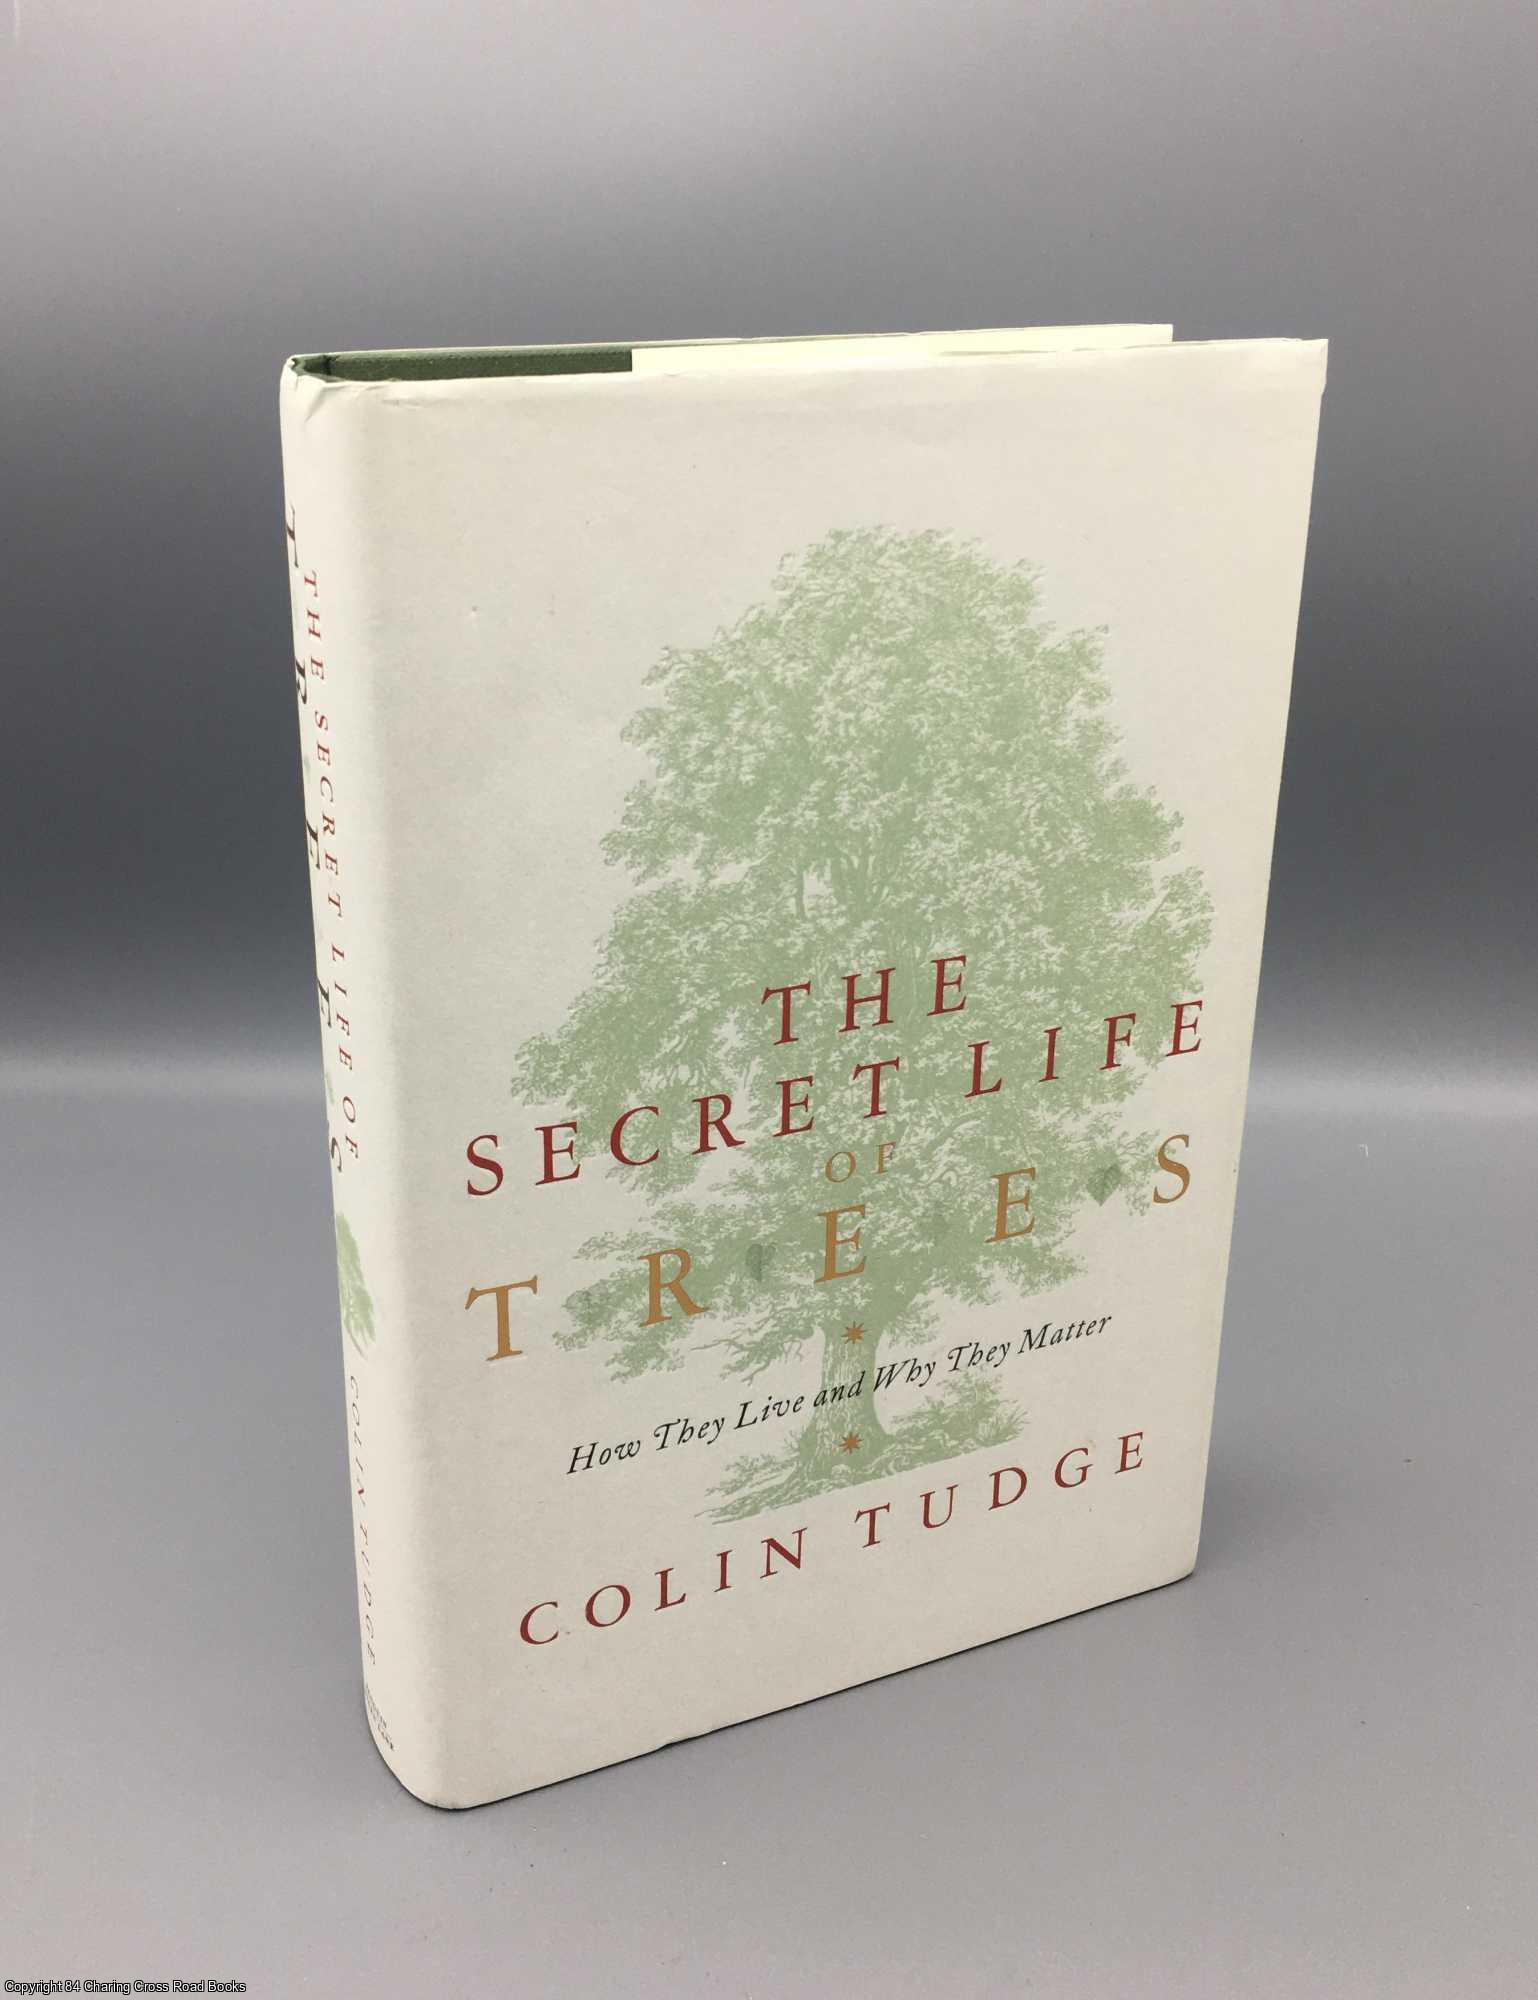 Tudge, Colin - The Secret Life of Trees: How They Live and Why They Matter